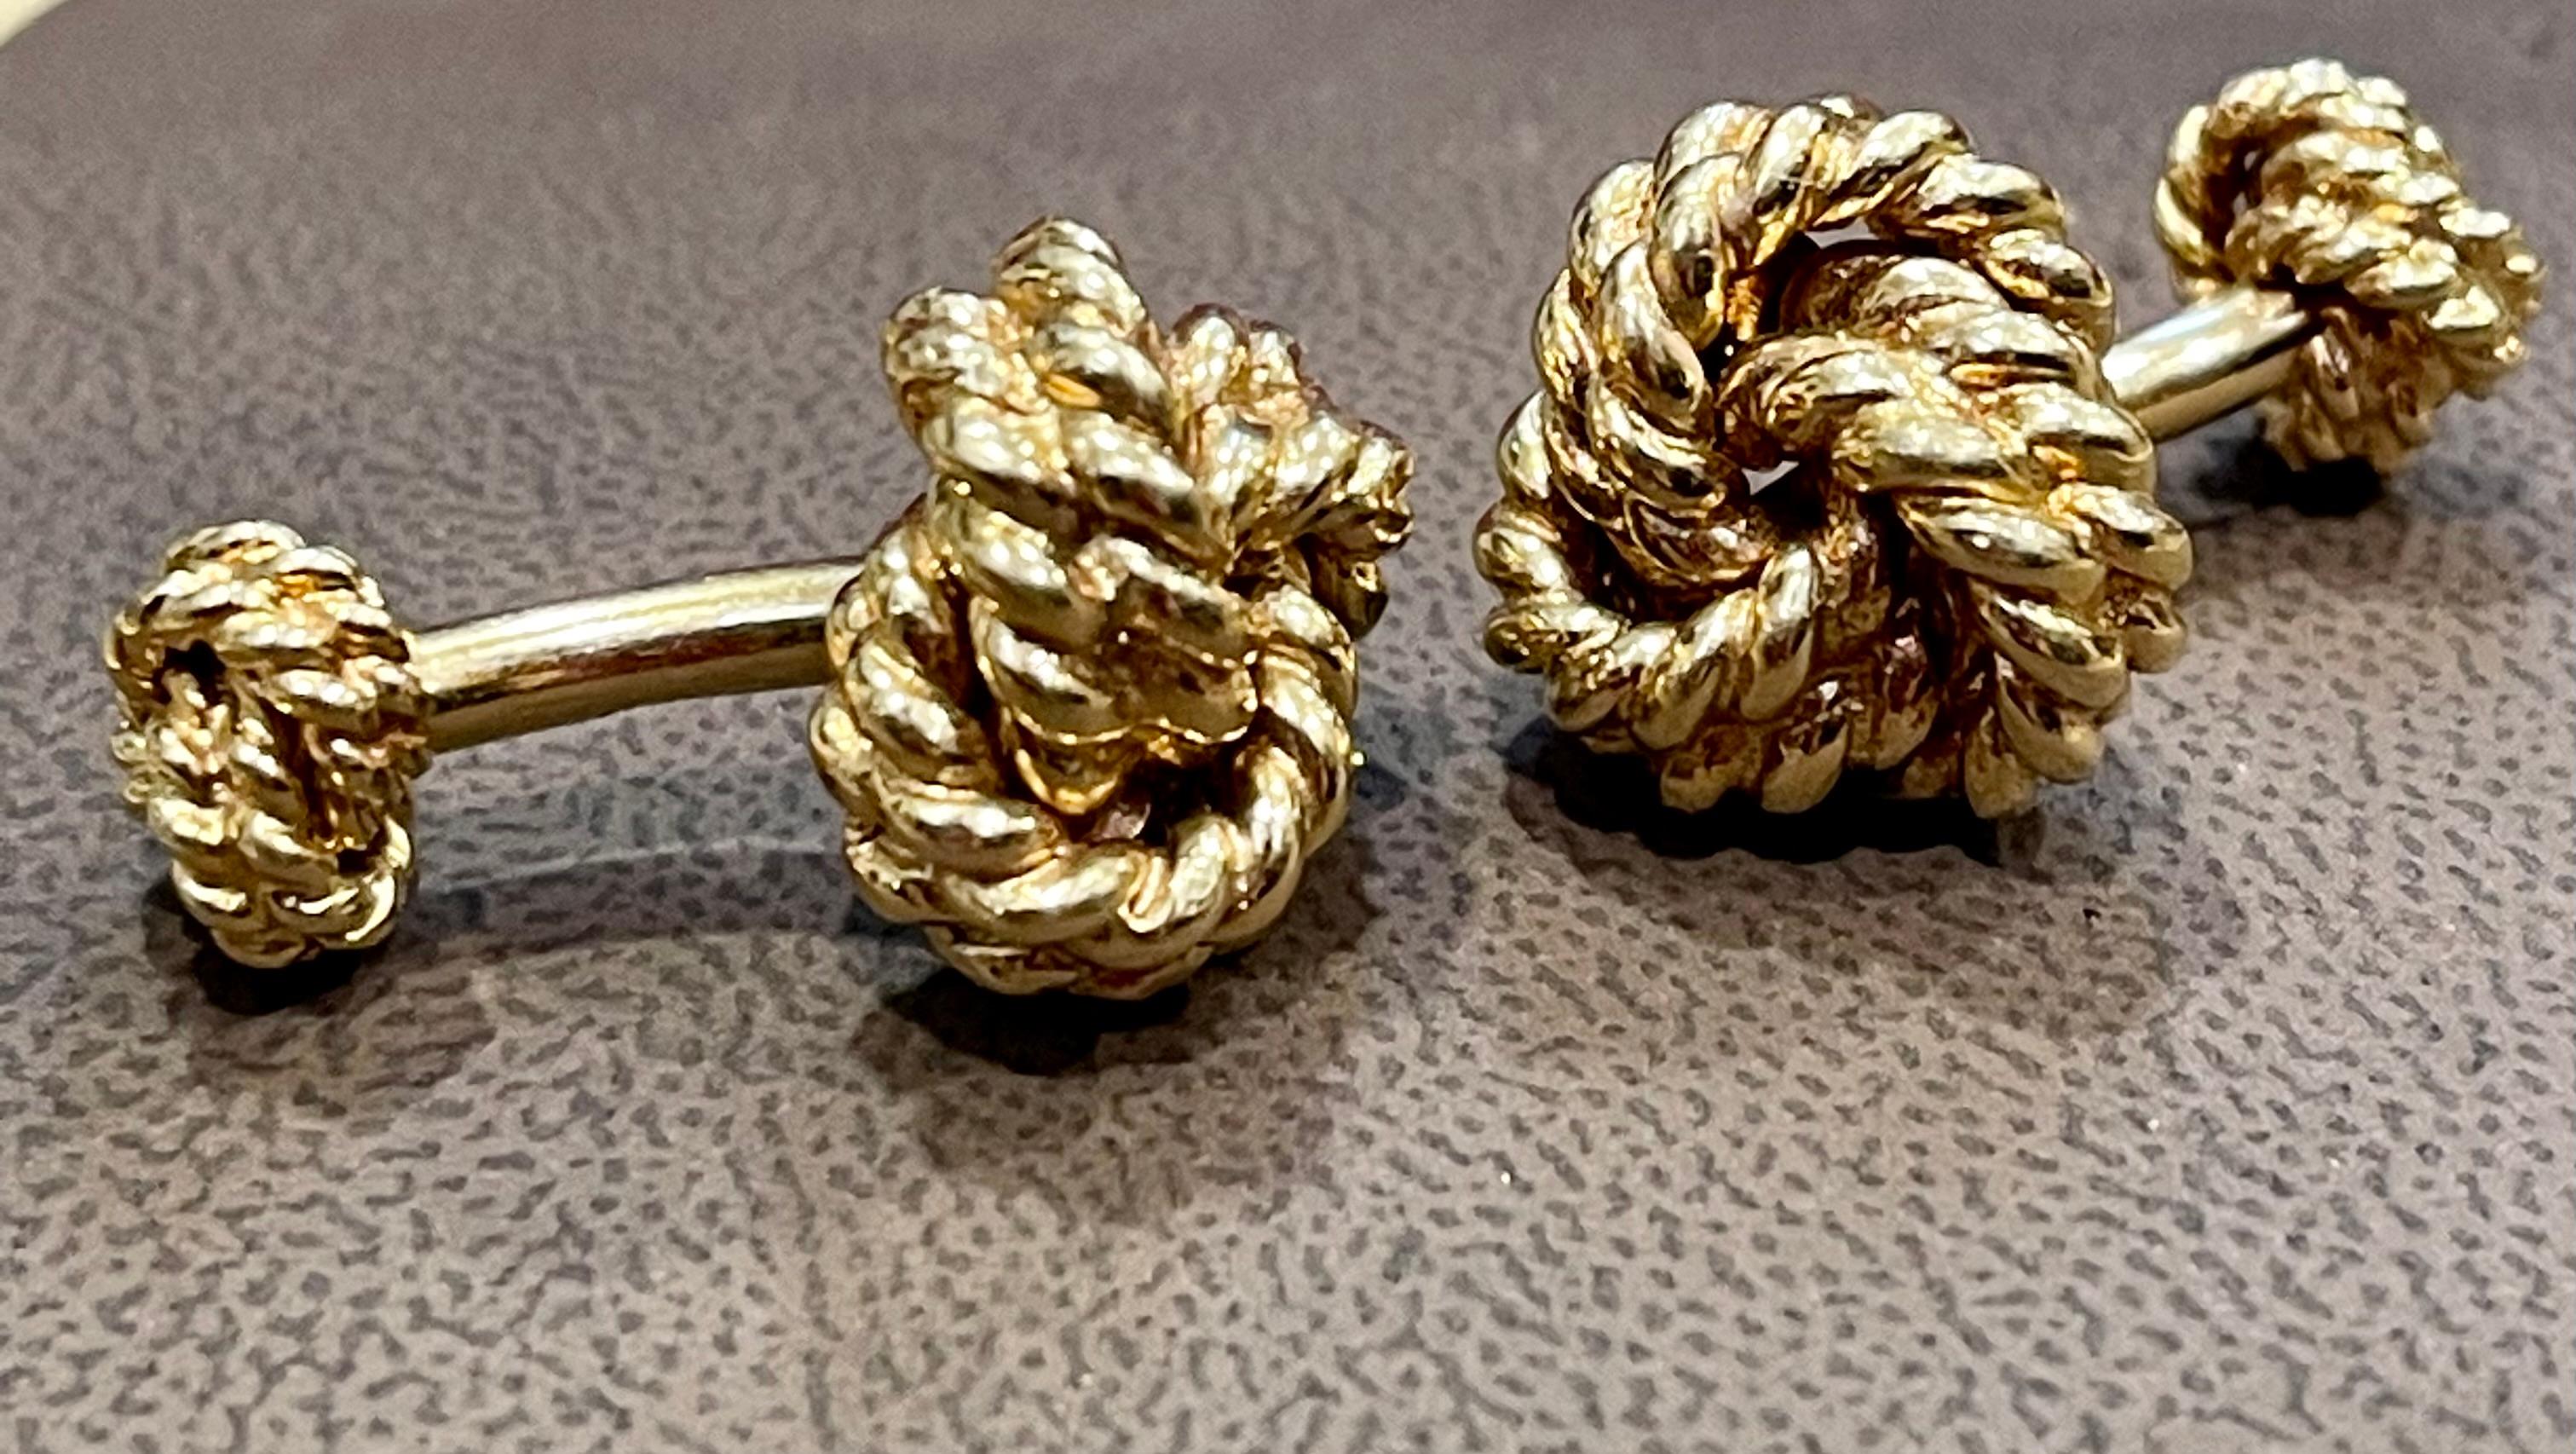 14k Gold Trinity Love Woven Knot Cuff Links in 14 Karat Yellow Gold 28 Gm, Men's For Sale 8